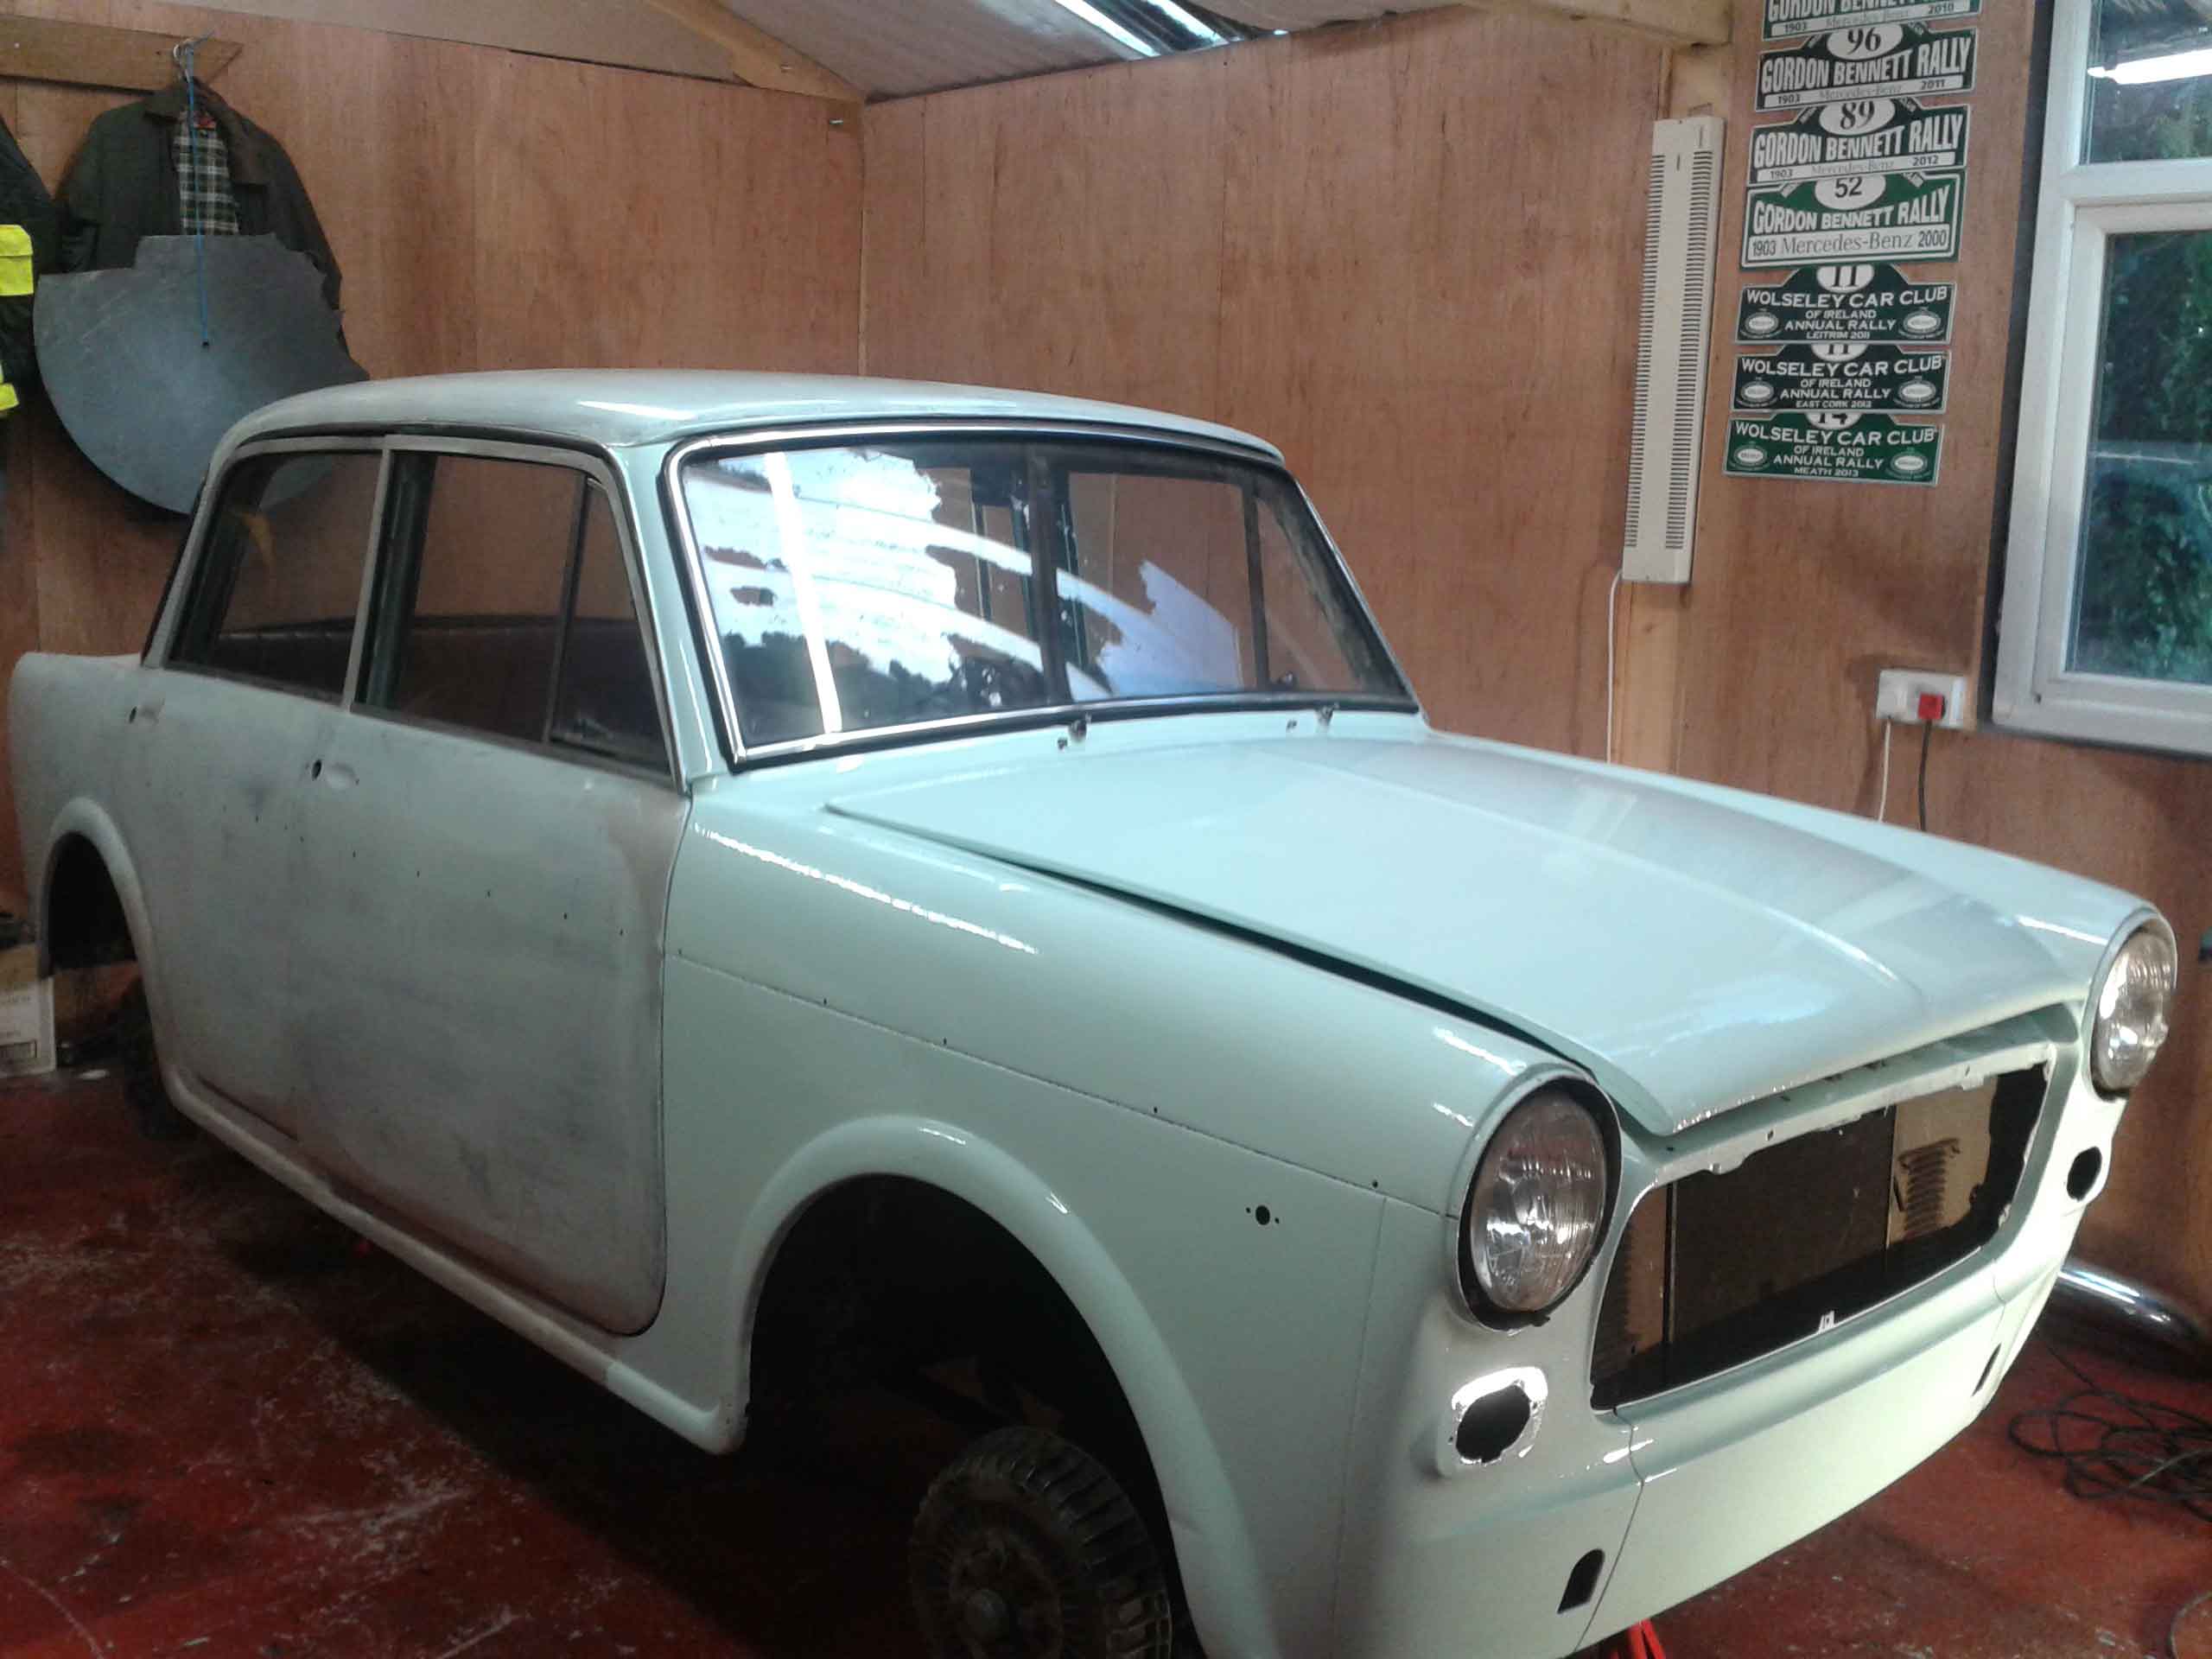 How to handpaint a car or how to handpaint a vintage Fiat car